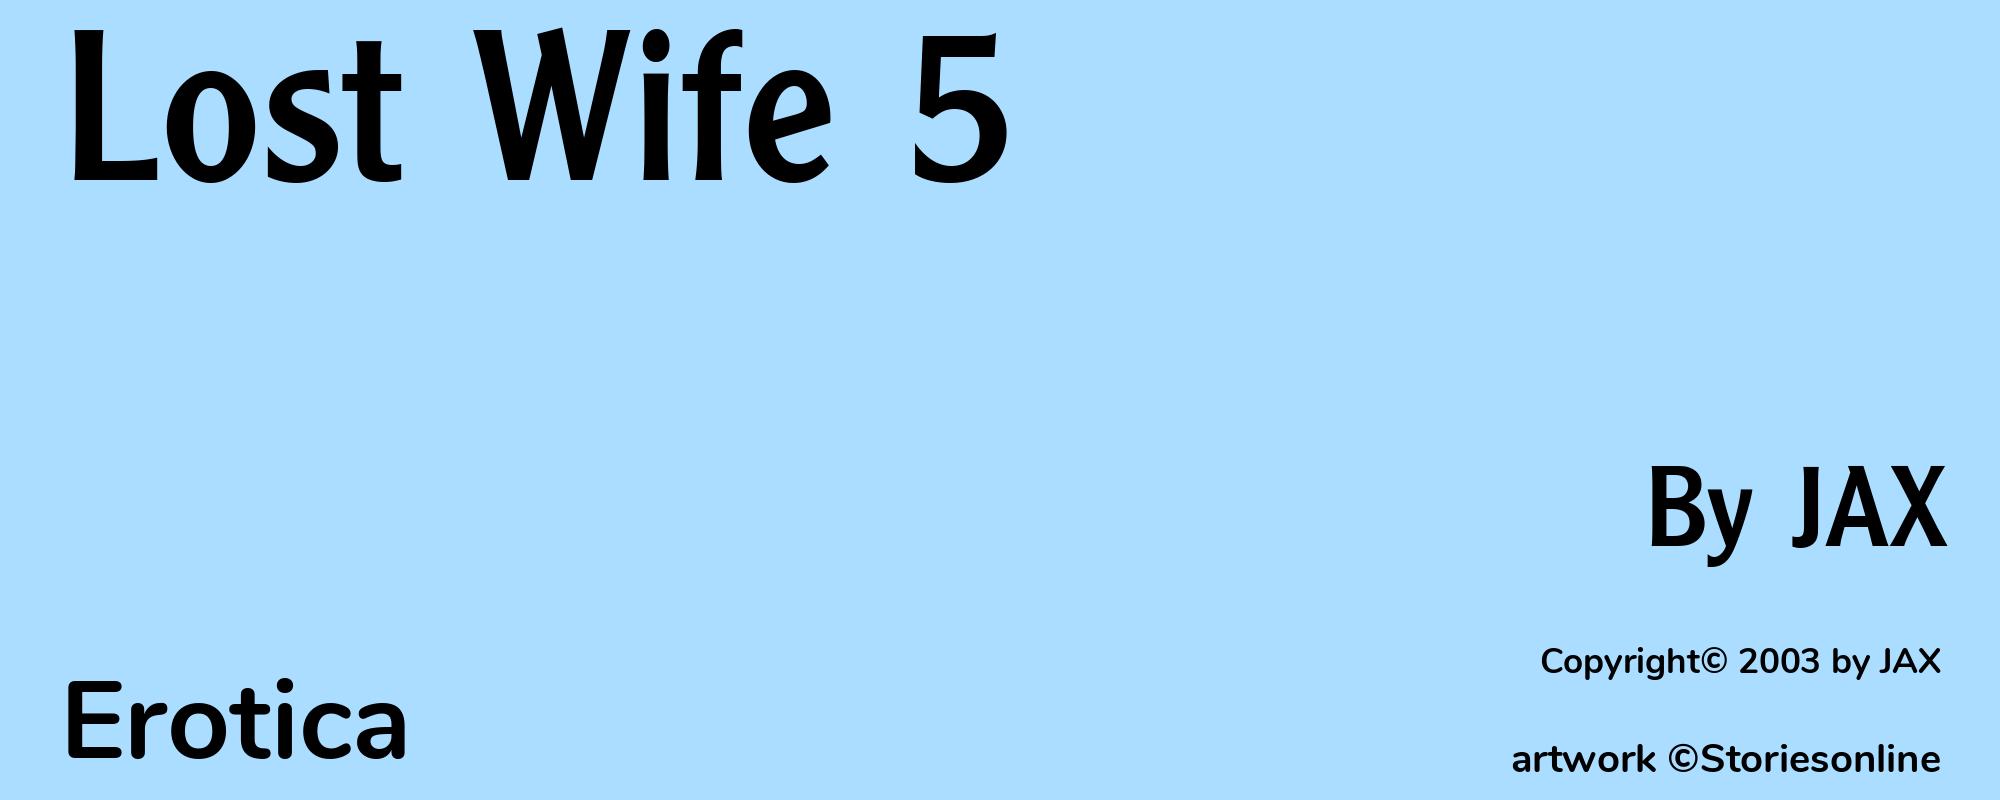 Lost Wife 5 - Cover